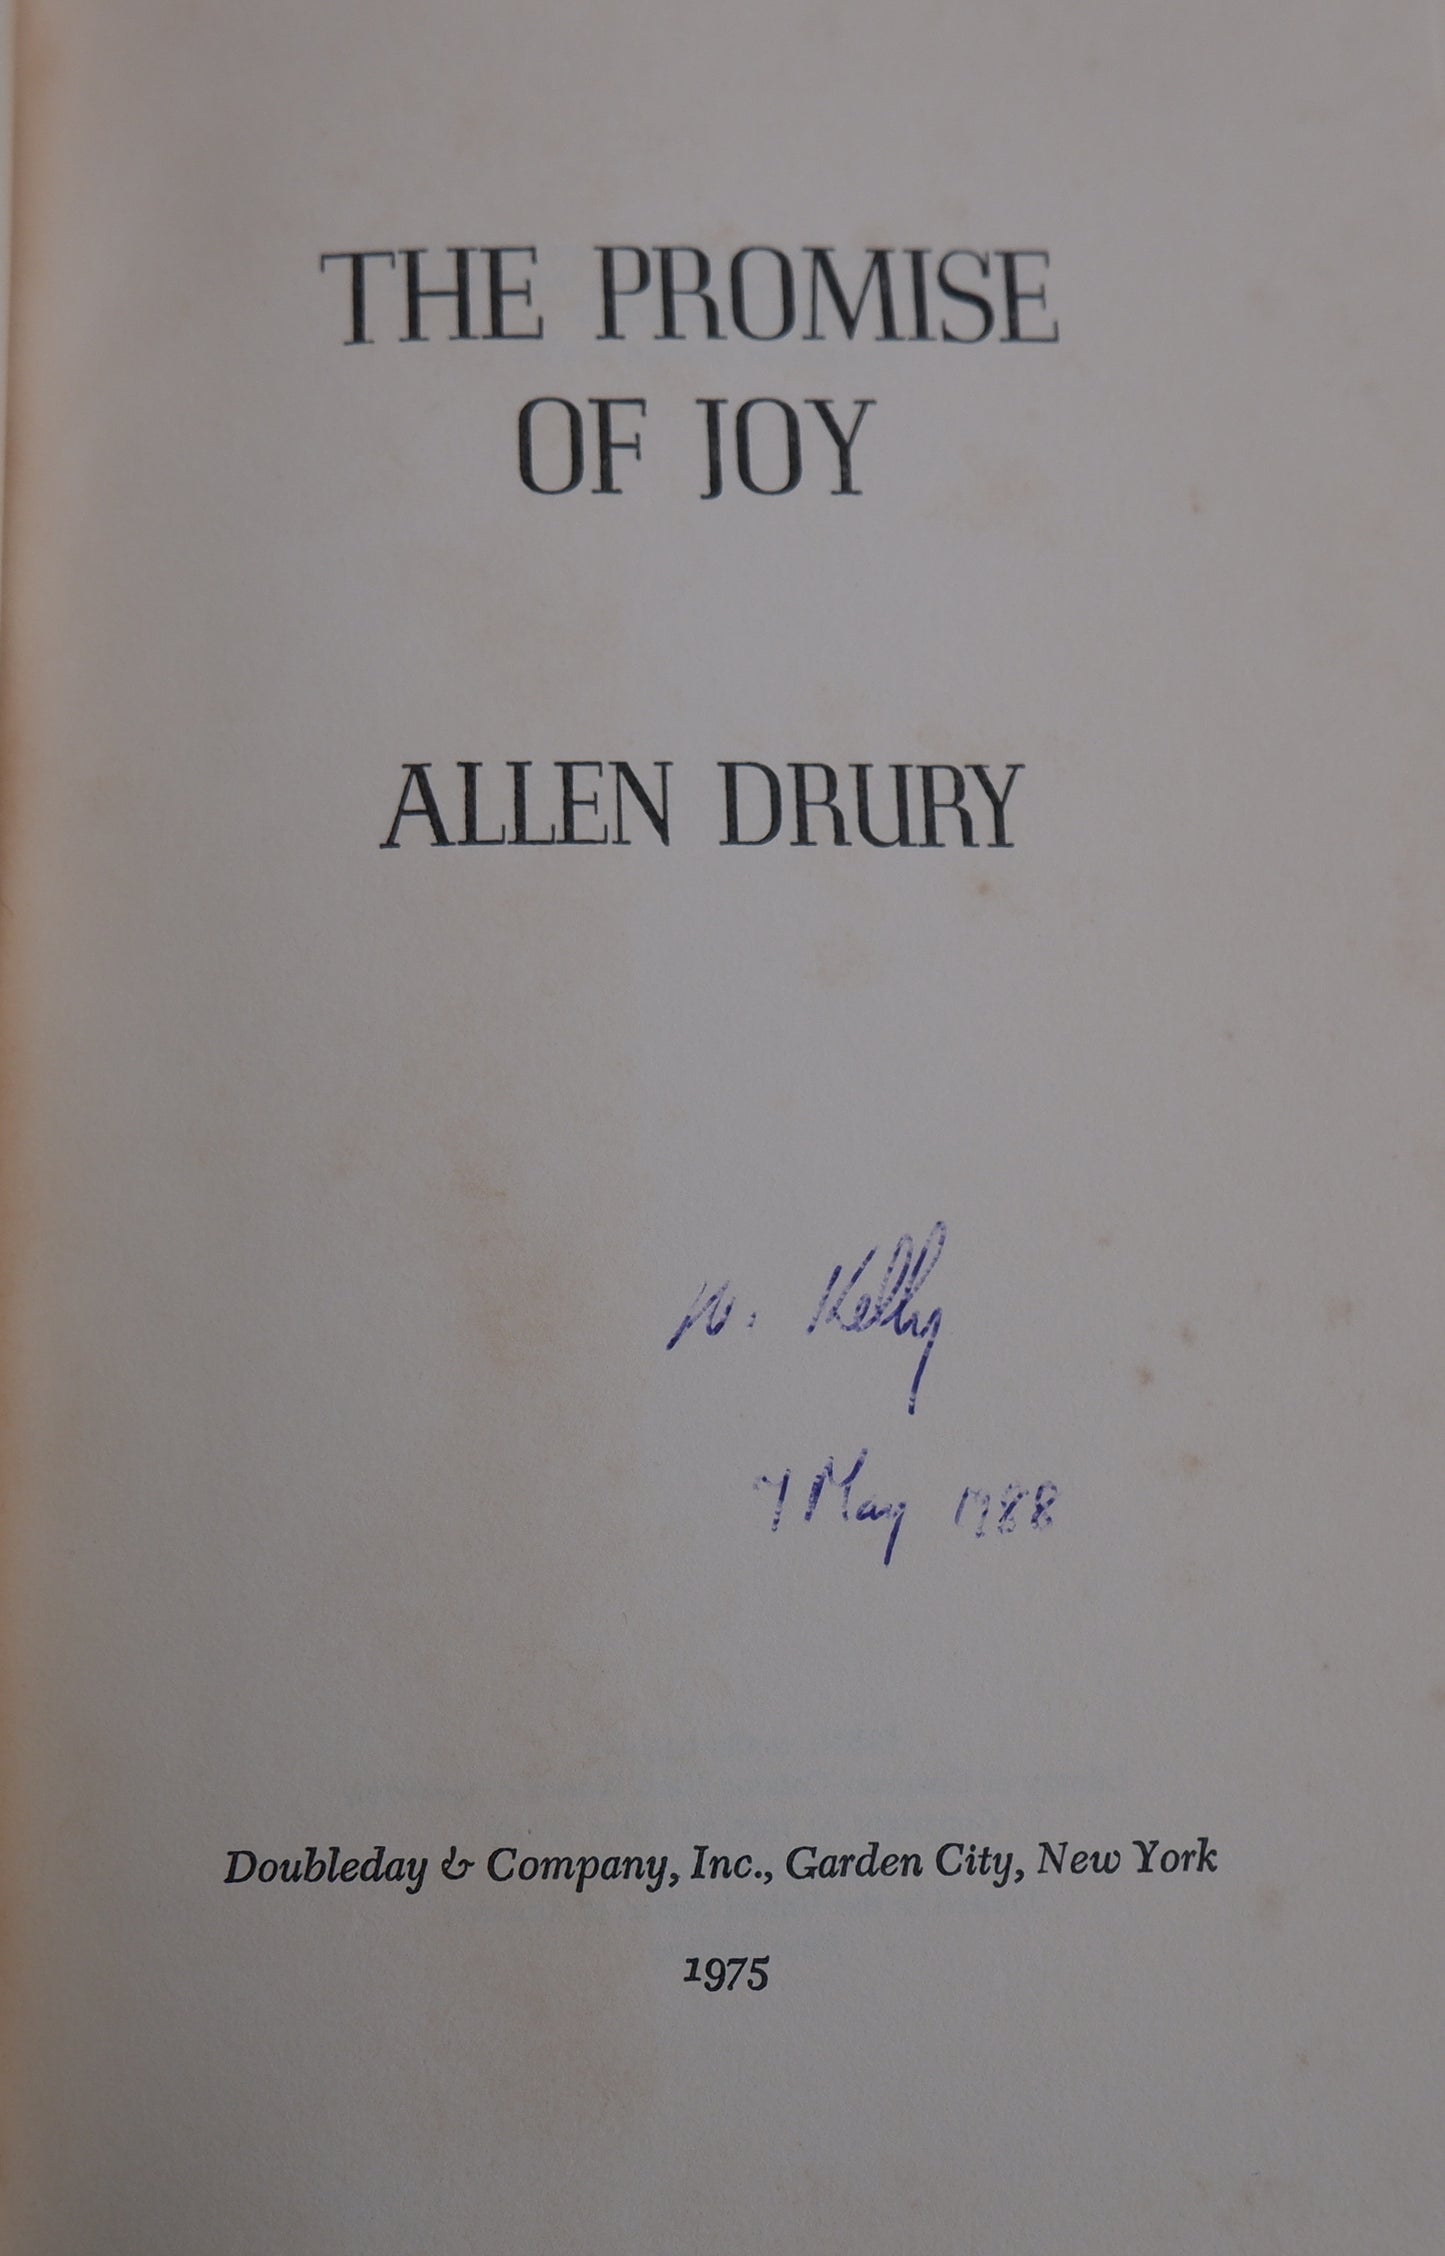 The Promise of Joy - Allen Drury (First Edition)